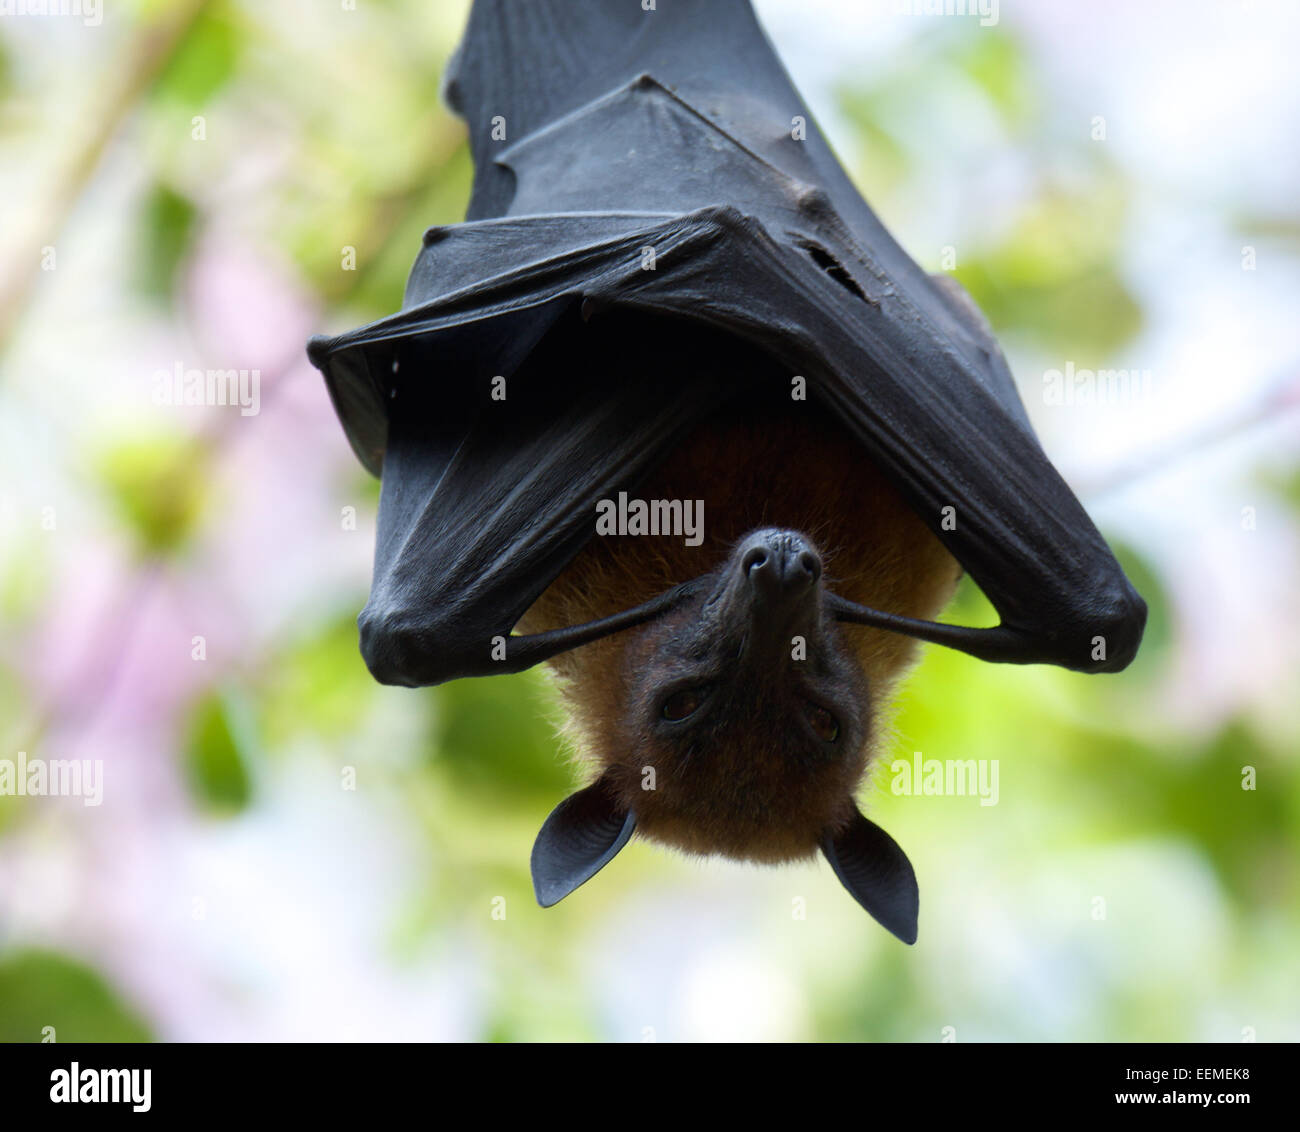 Lyle's flying fox (Pteropus lylei) is a species of bat in the family Pteropodidae. Stock Photo